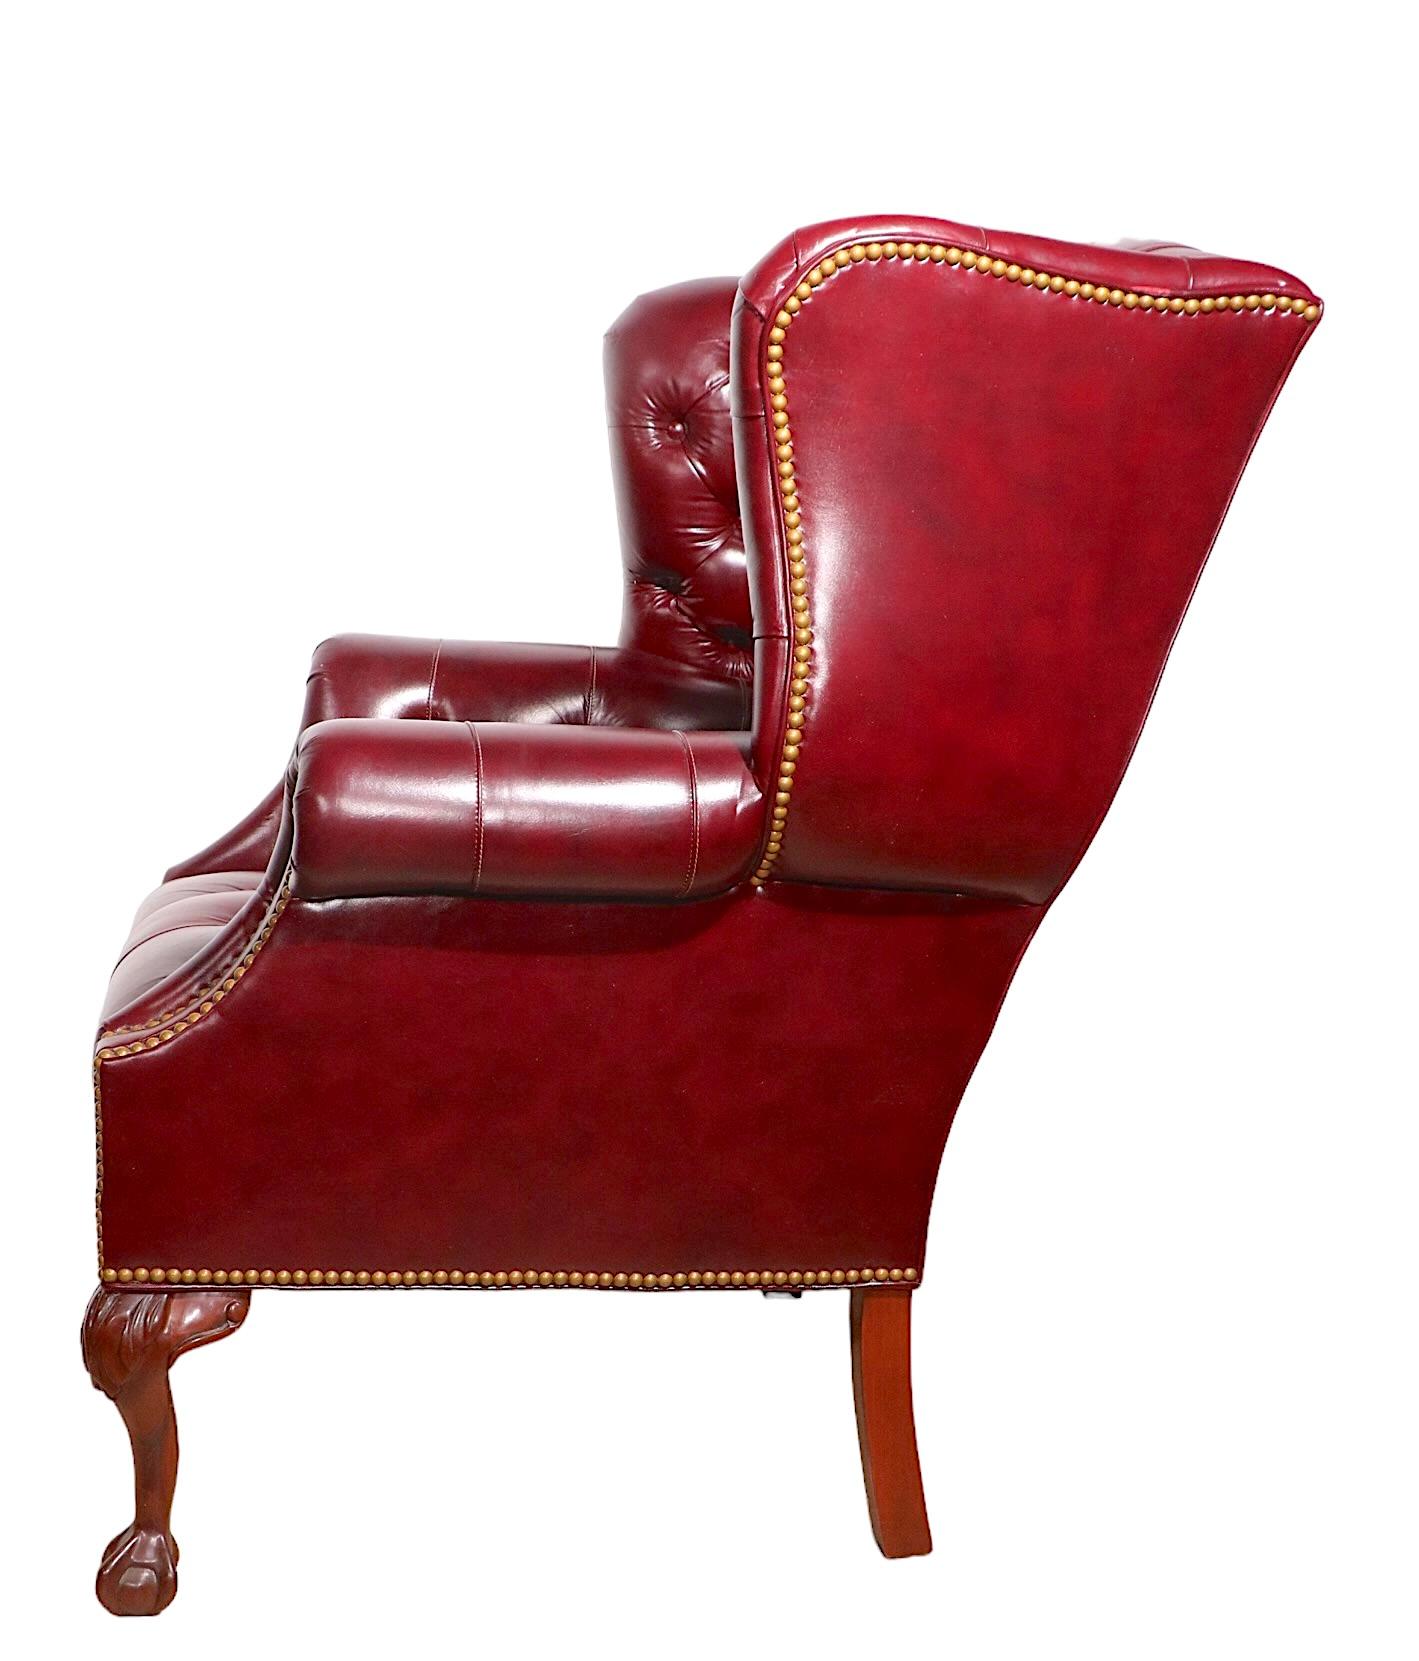 Tufted Leather Wing Chair and Ottoman by Leathercraft Inc. 6